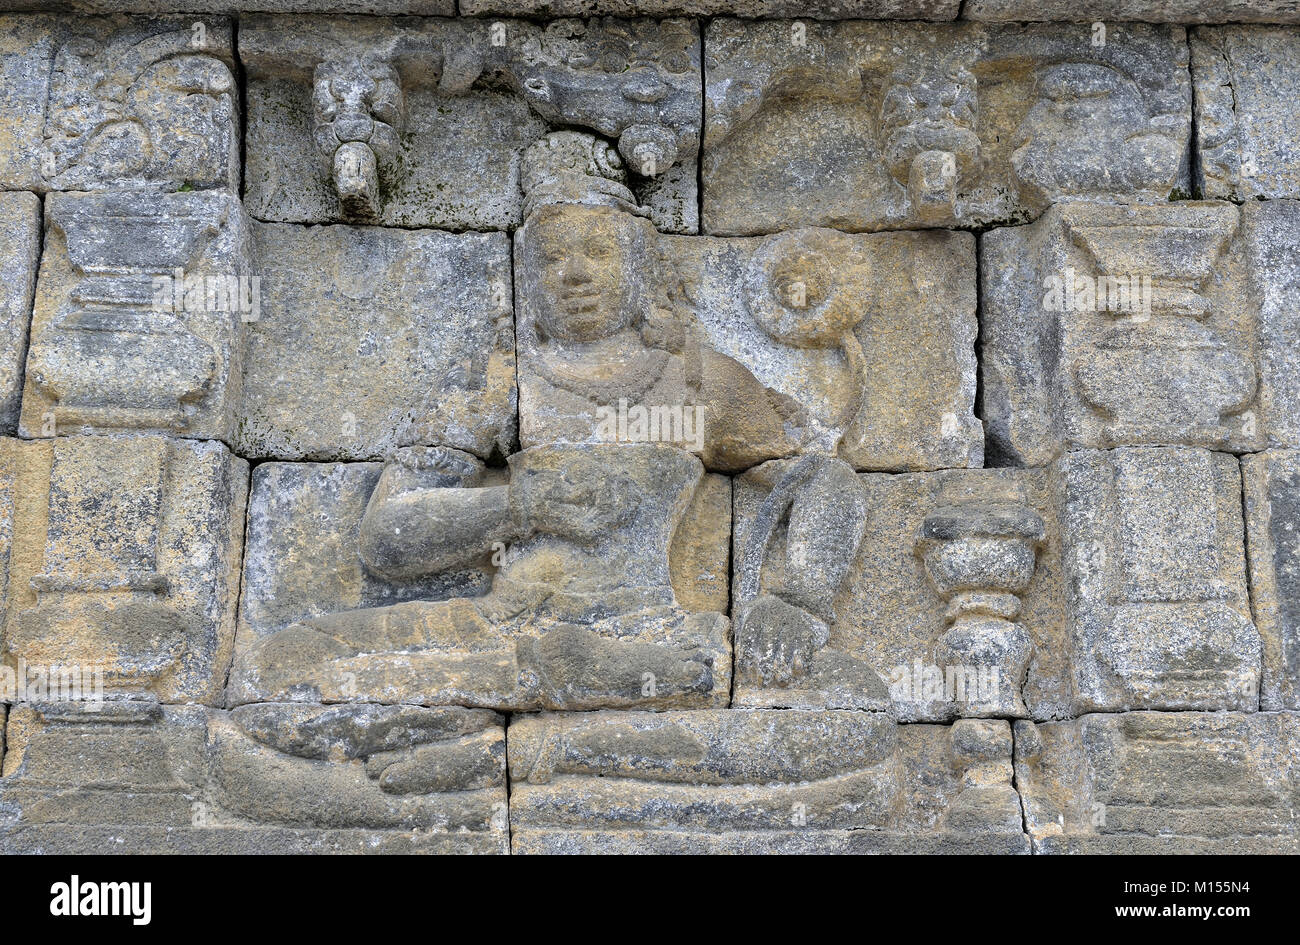 Detail of Buddhist carved relief in Borobudur temple in Yogyakarta, Java, Indonesia.. Stock Photo